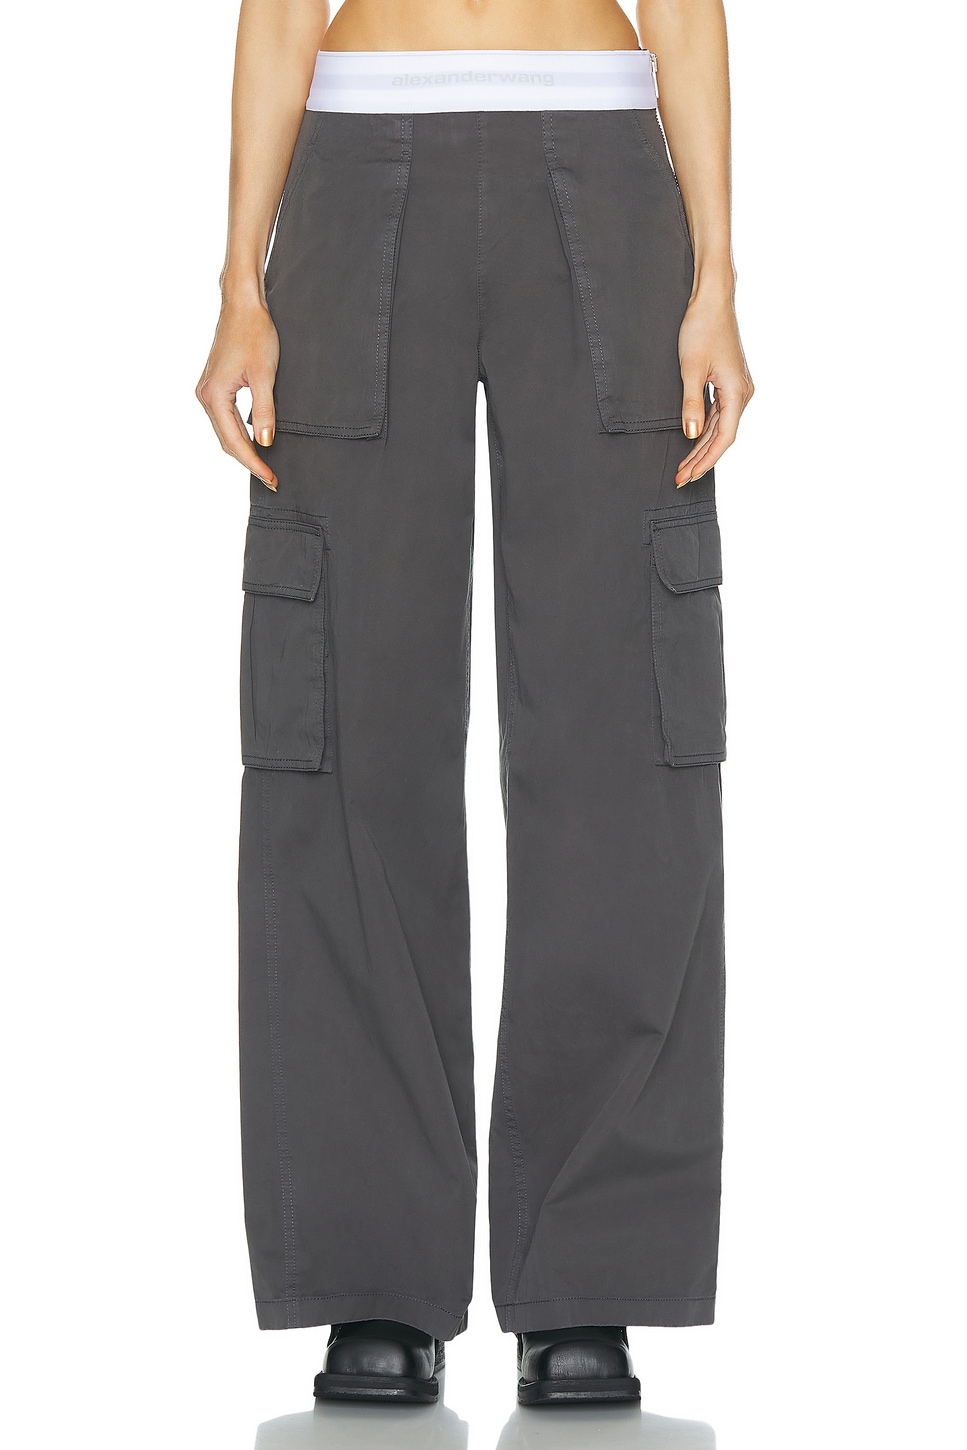 Image 1 of Alexander Wang Mid Rise Cargo Rave Pant in Off Black